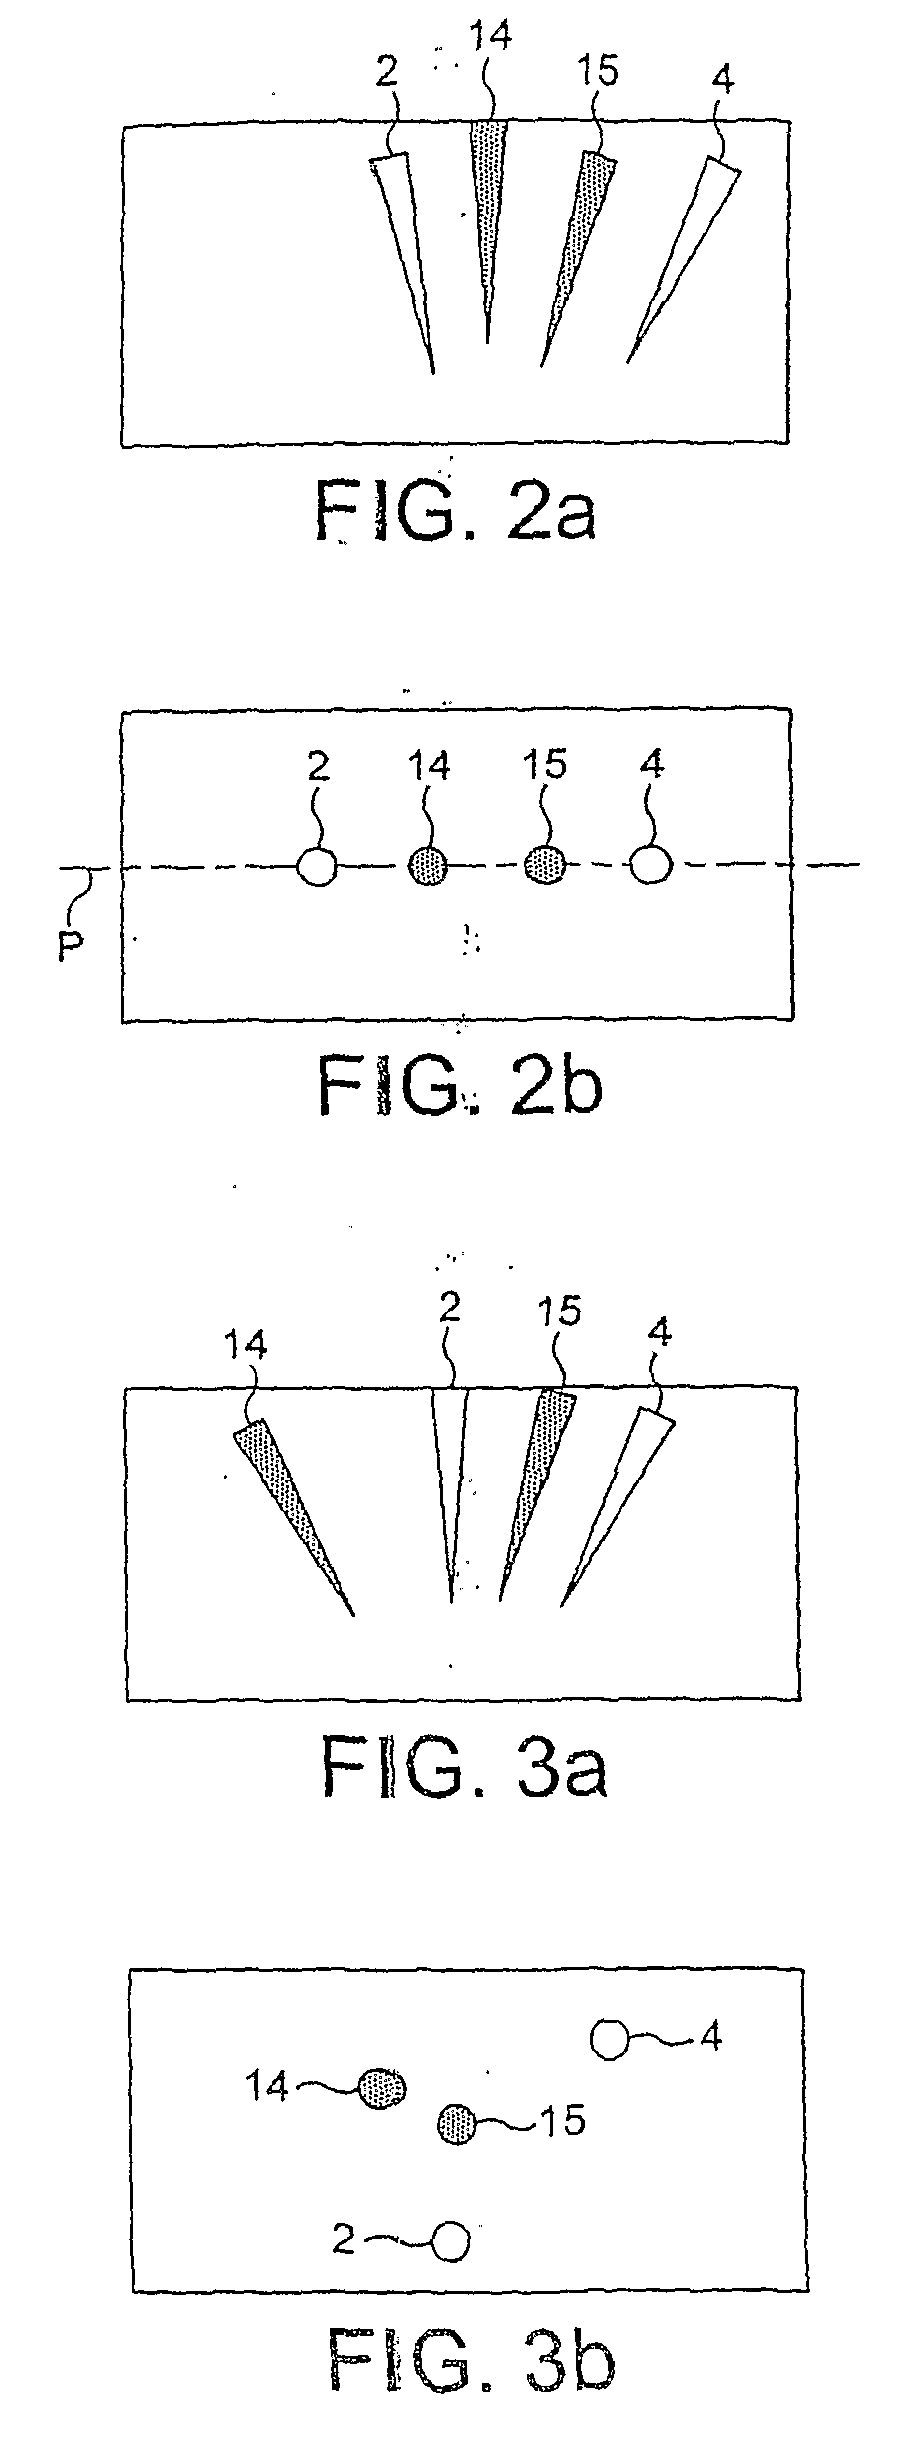 Method and System for in-Cup Dispensing, Mixing and Foaming Hot and Cold Beverages From Liquid Concentrate